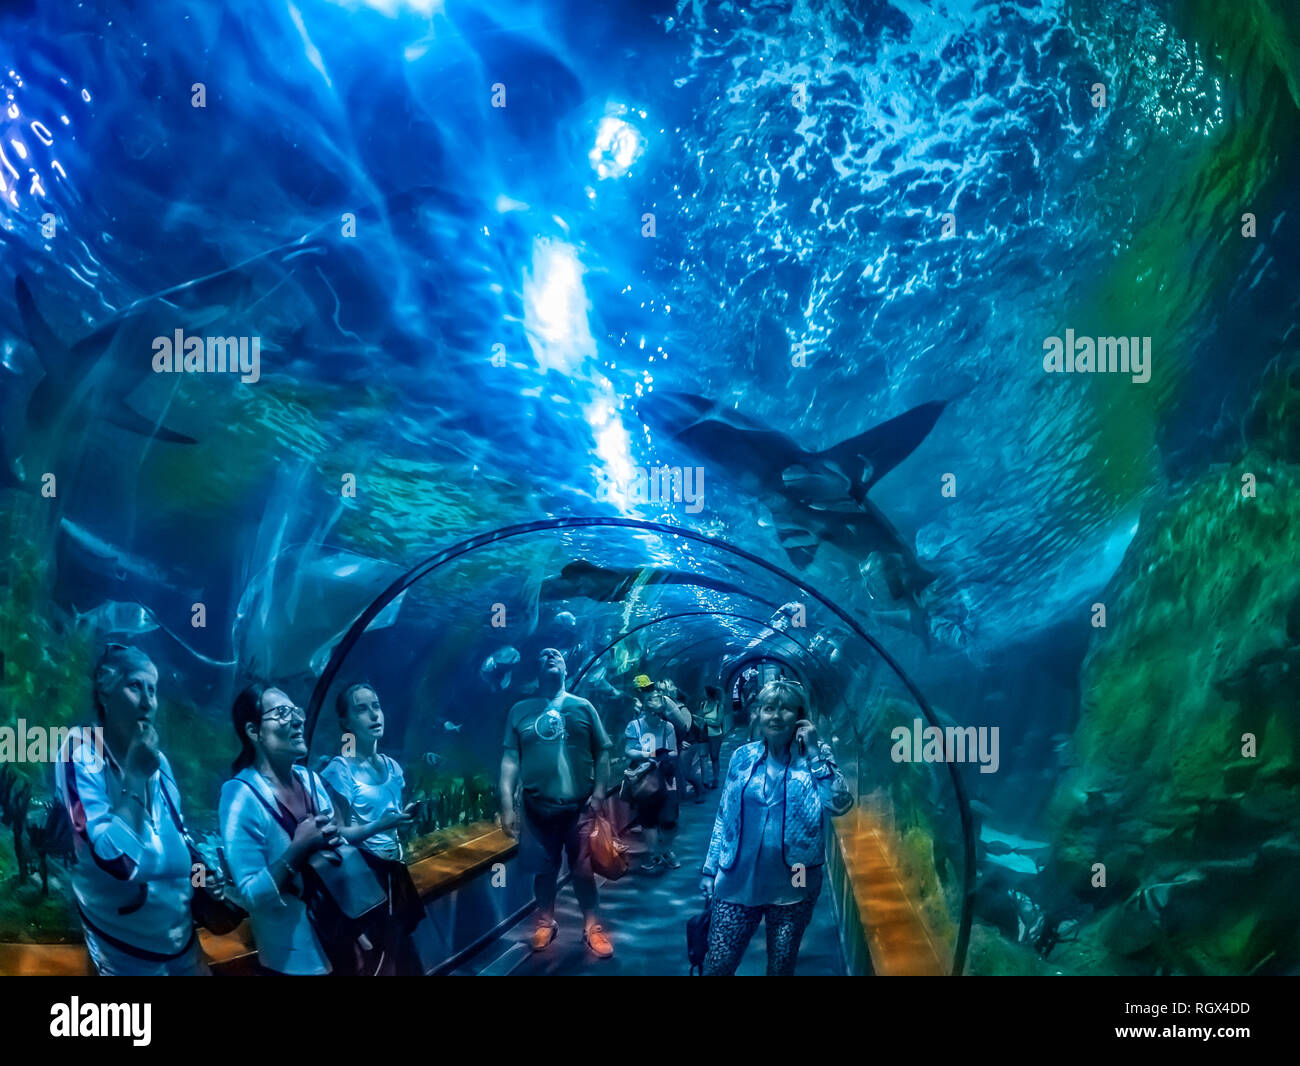 Tenerife, Santa Cruz, Spain - January 17, 2019: People inside Loro Park visiting the famous aquarium tunnel with sharks and different species of fish Stock Photo